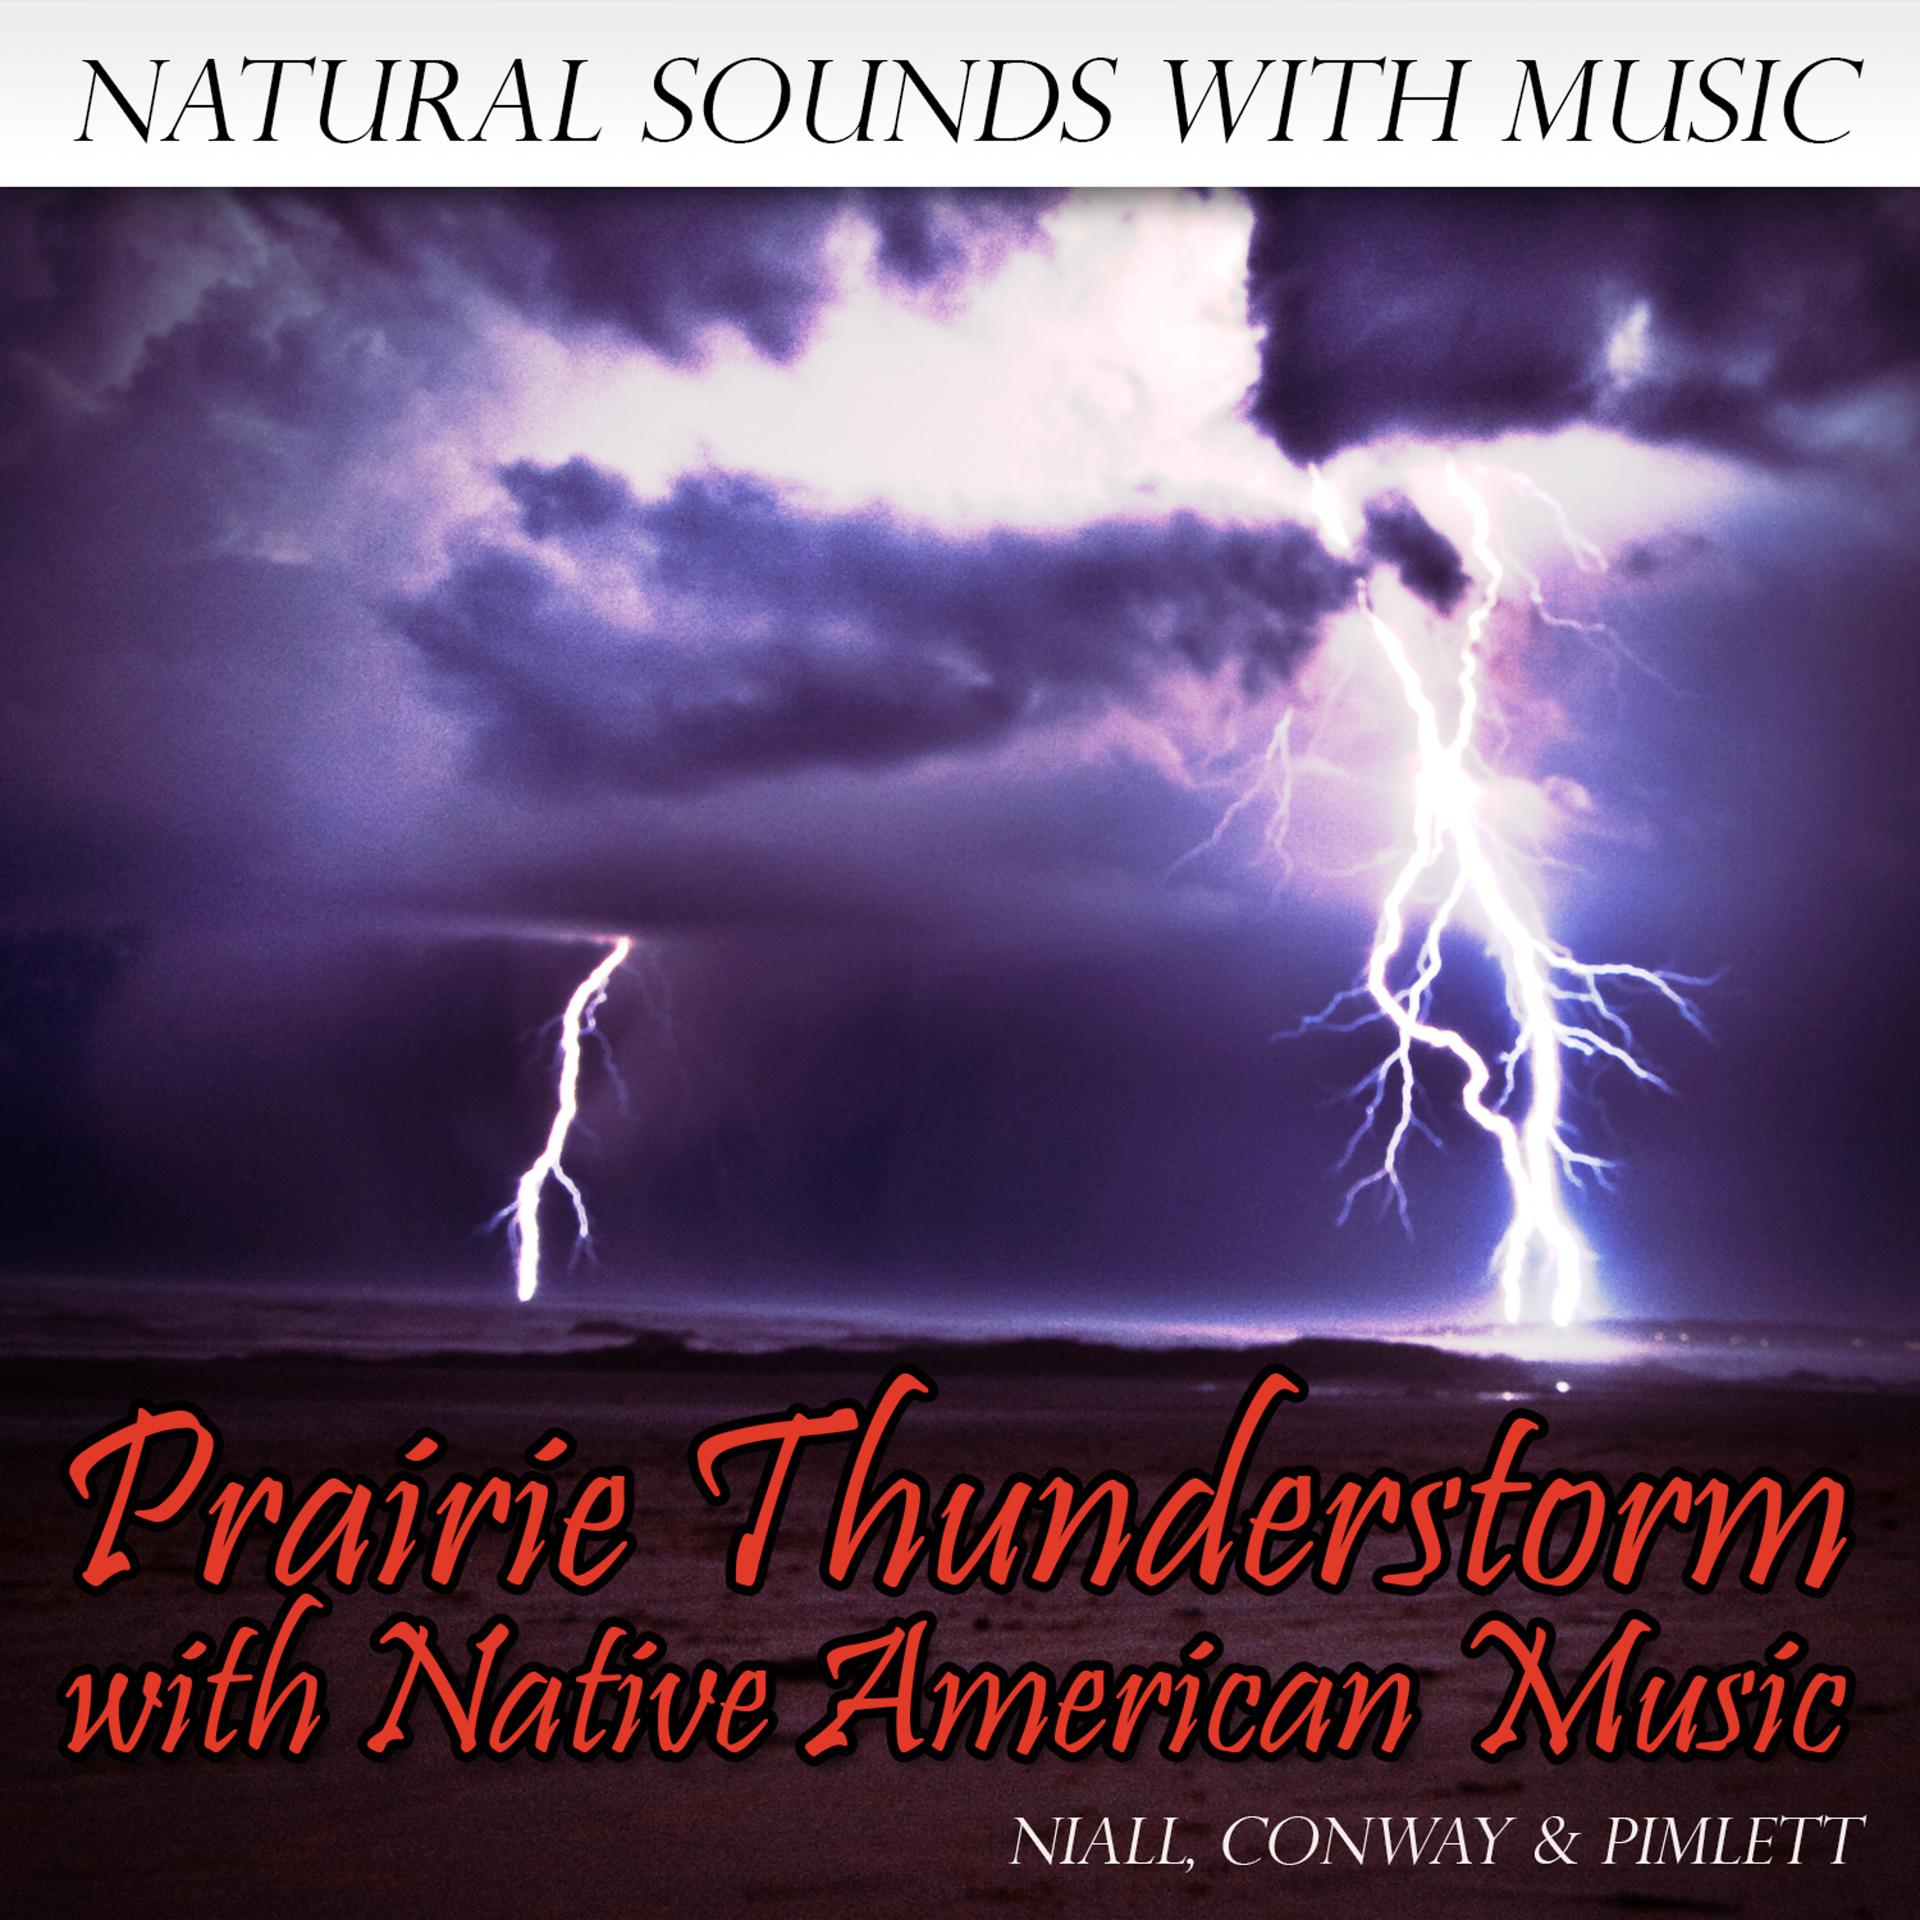 Постер альбома Natural Sounds with Music: Prairie Thunderstorm with Native American Music